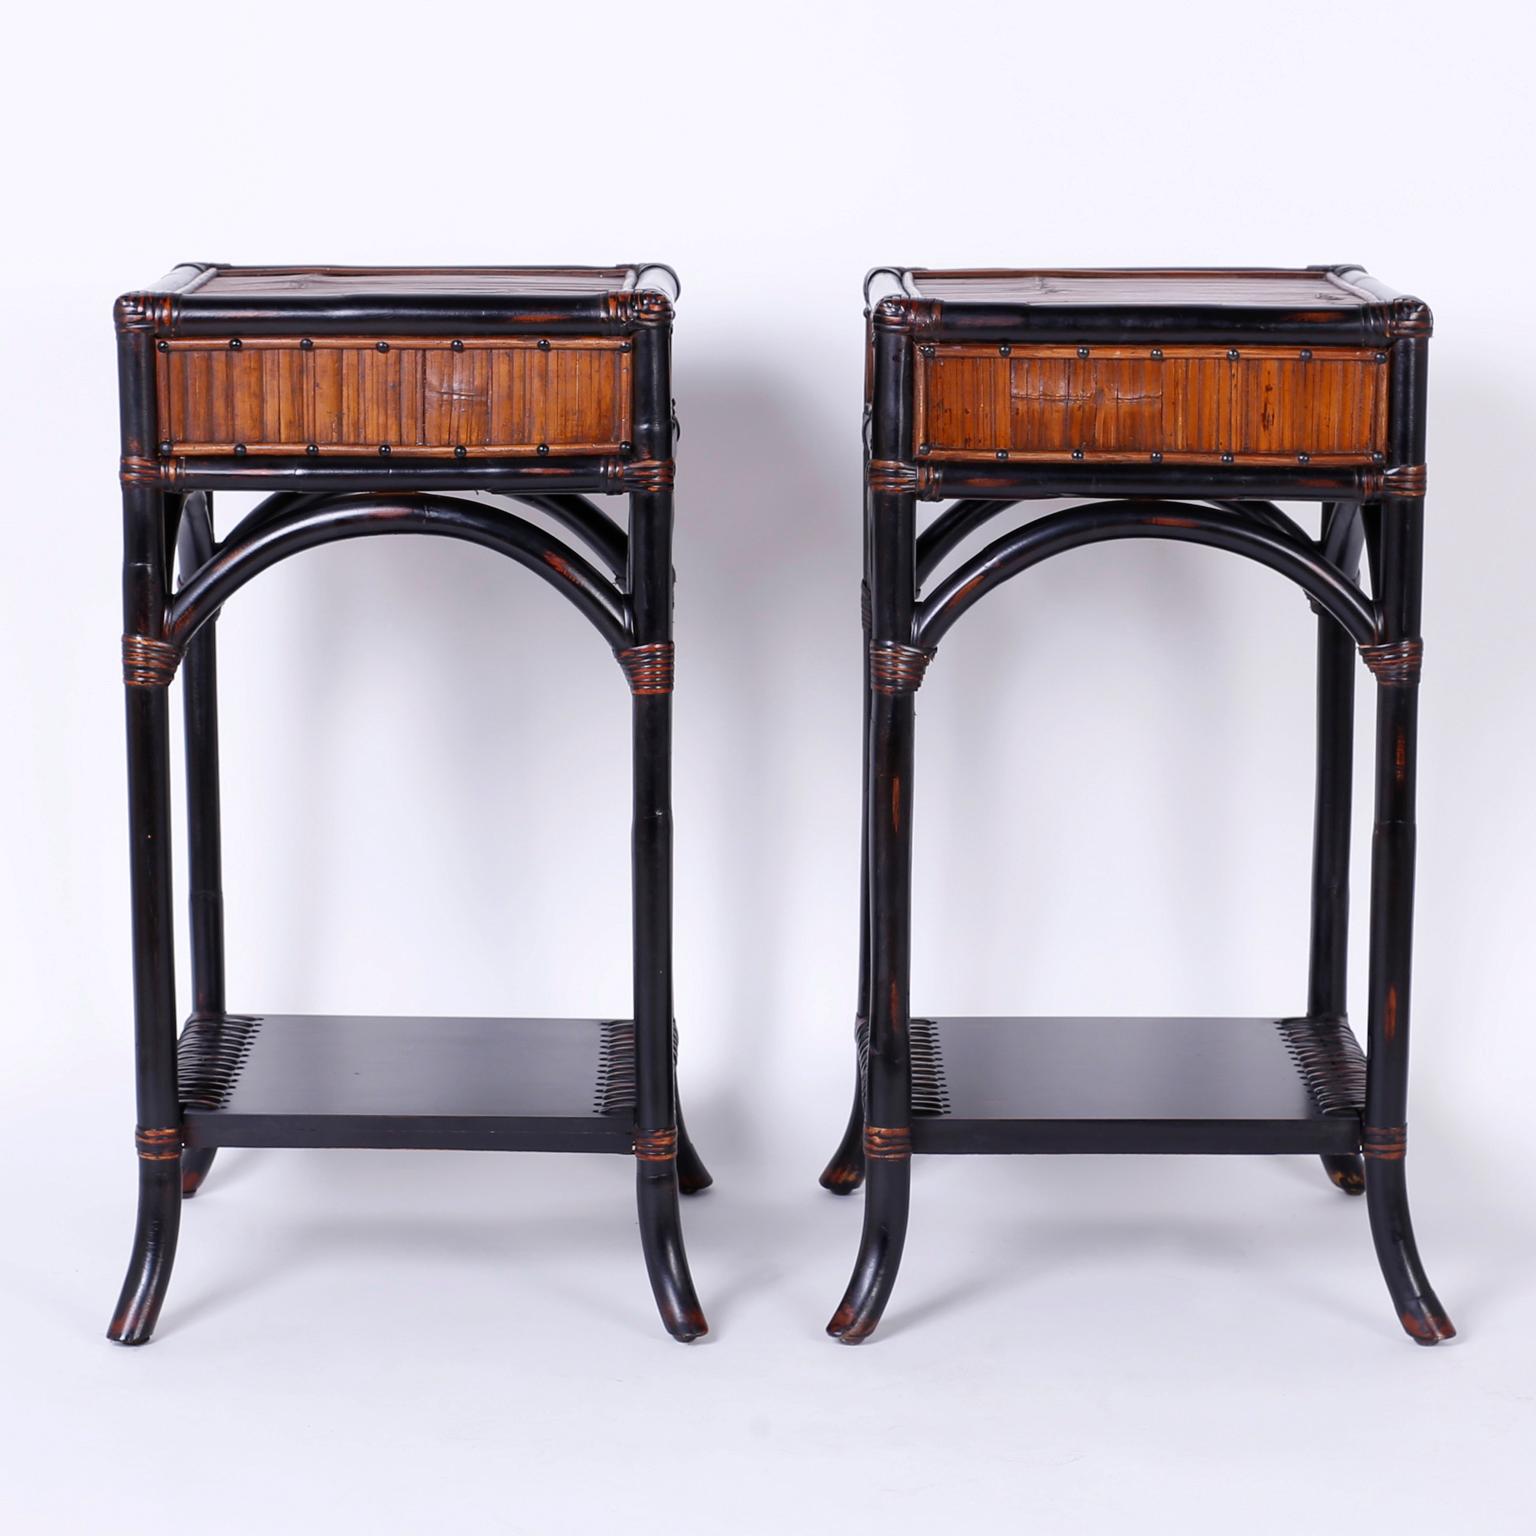 Handsome pair of vintage faux bamboo and rattan stands or tables with rattan tops and sides with wrapped corners, bentwood frame construction, and chic contrived wear. Perfect combination of modern and traditional British Colonial.
 